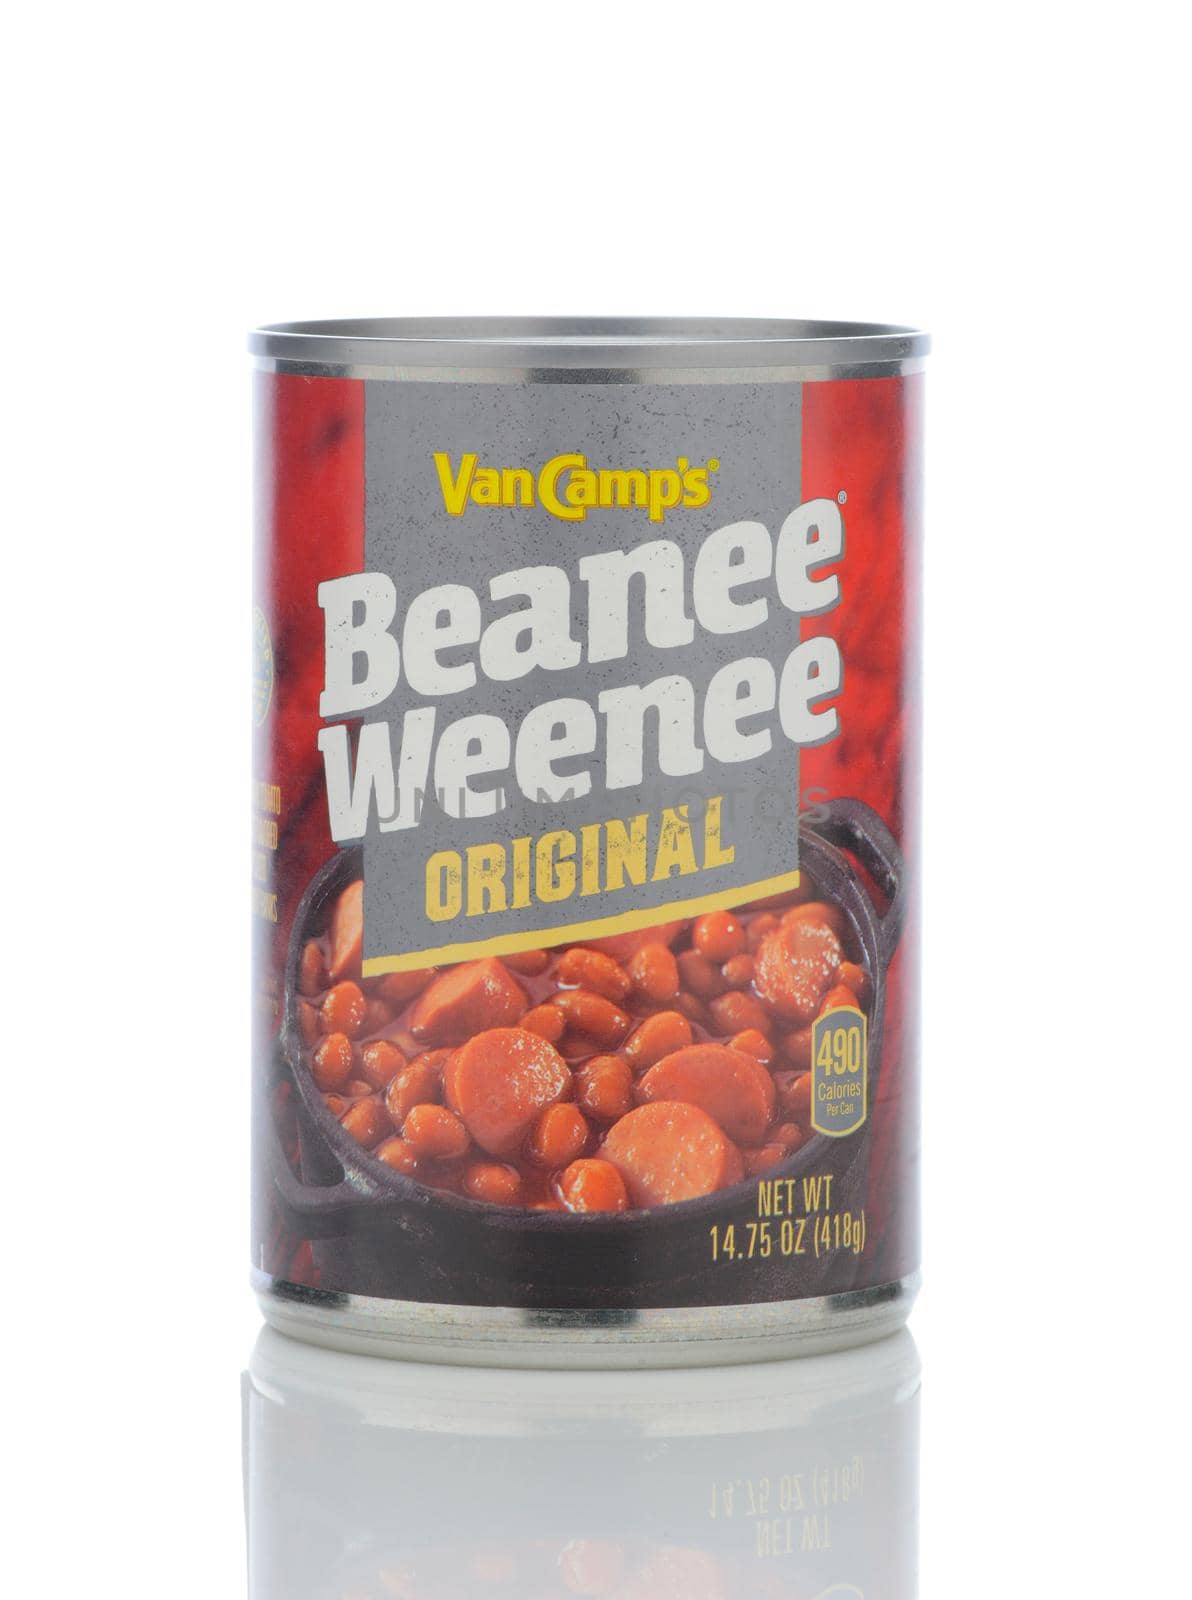 A can of Van Camps Beanee Weenee Original, cut up hot dogs mixed with baked beans by sCukrov